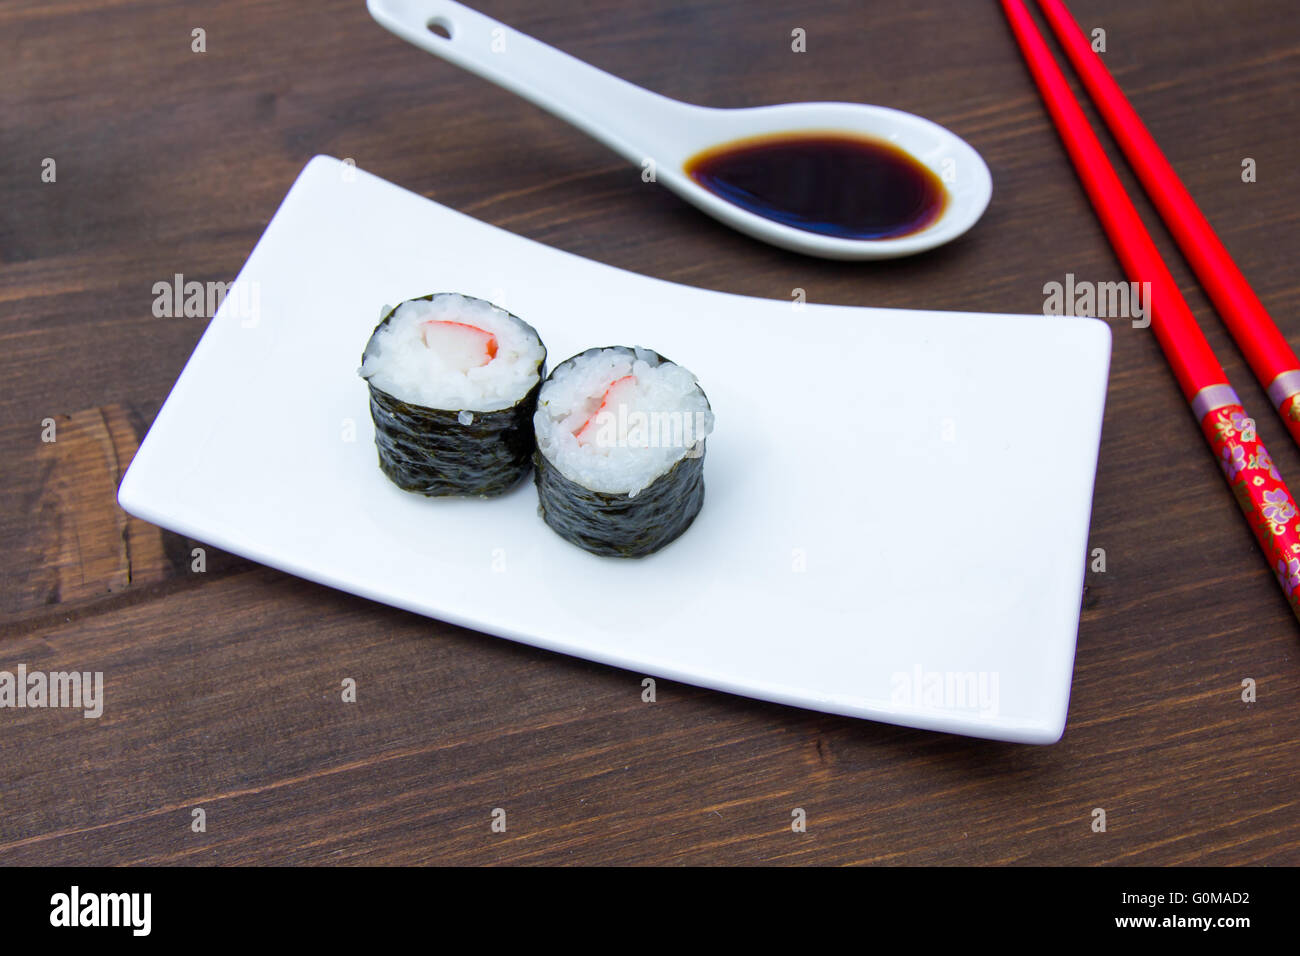 Maki with surimi on a wooden table seen up close Stock Photo